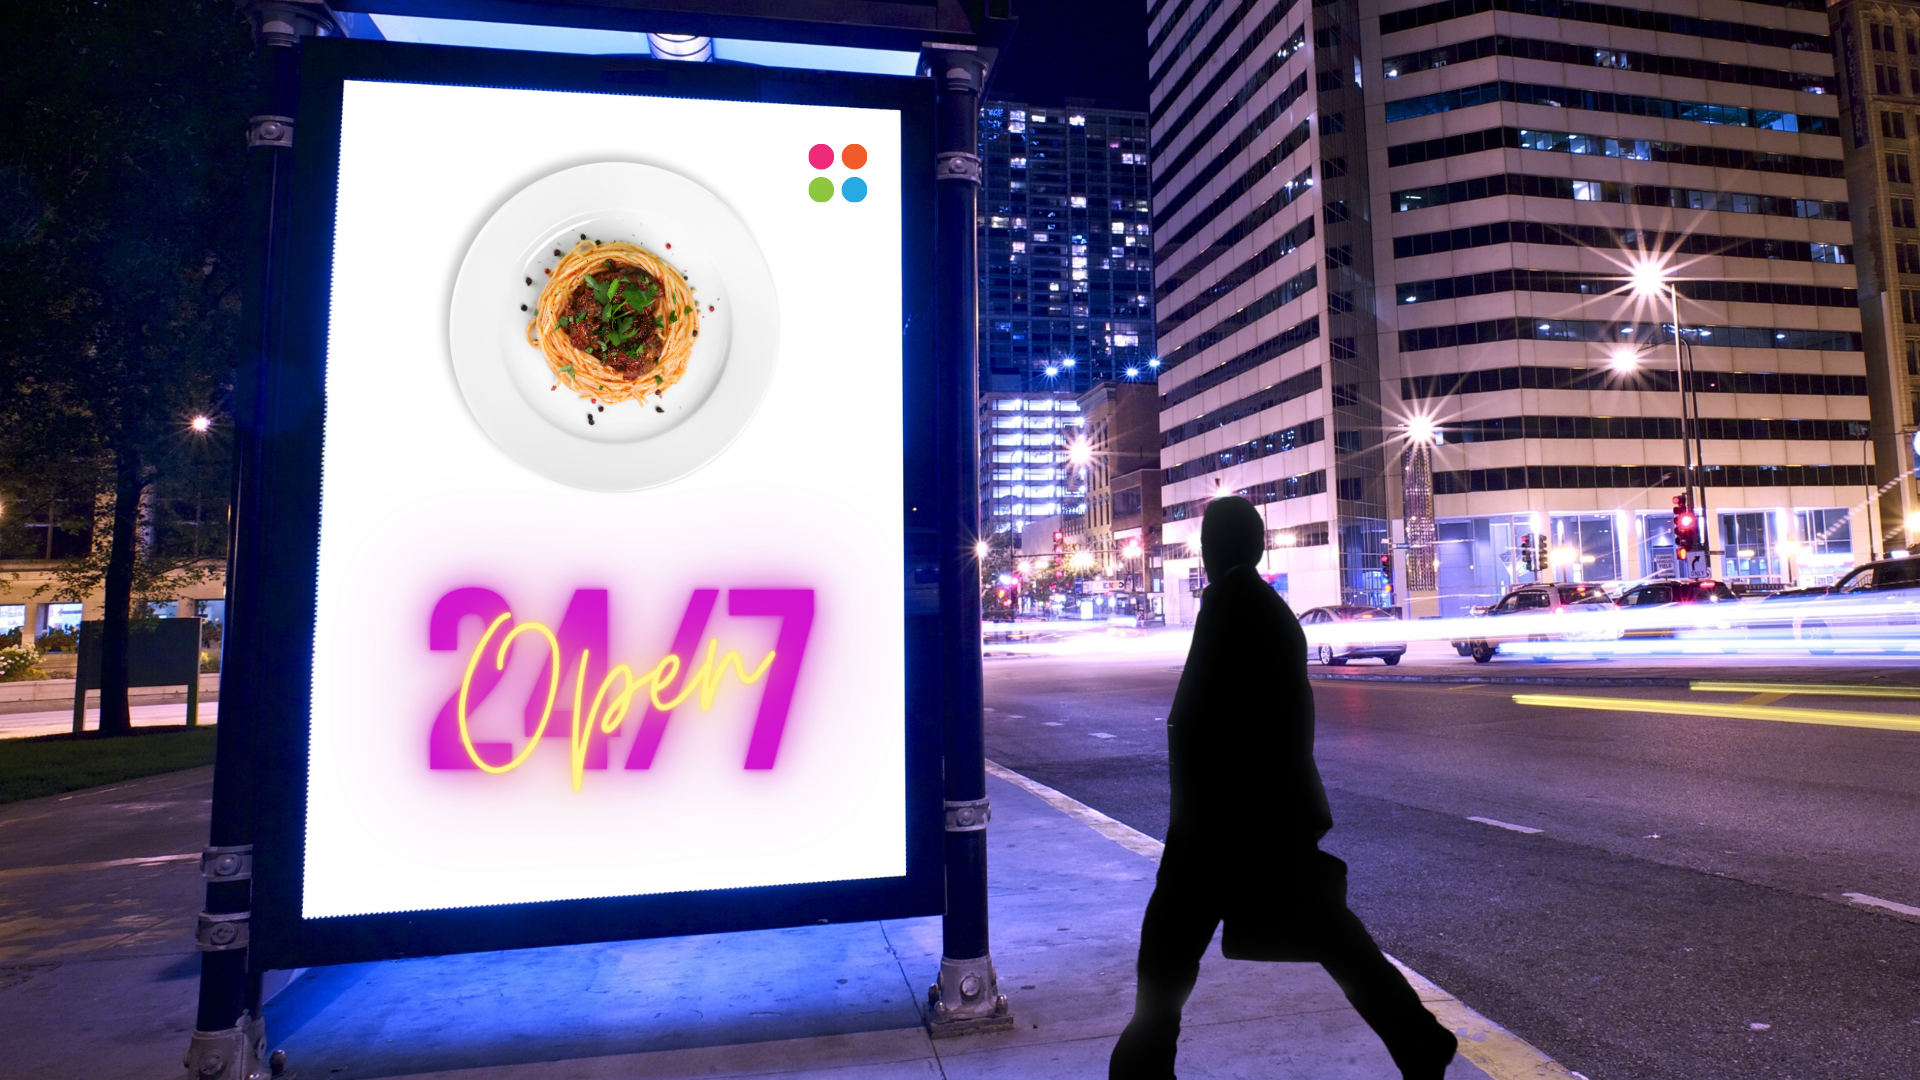 The dark silhouette of a man crossing an empty road appears to be staring at an outdoor digital signage display that shows the image of a nicely-plated spaghetti and the text &lsquo;24/7 Open&rsquo;. In the background, tall buildings and glowing street lights are partially visible.